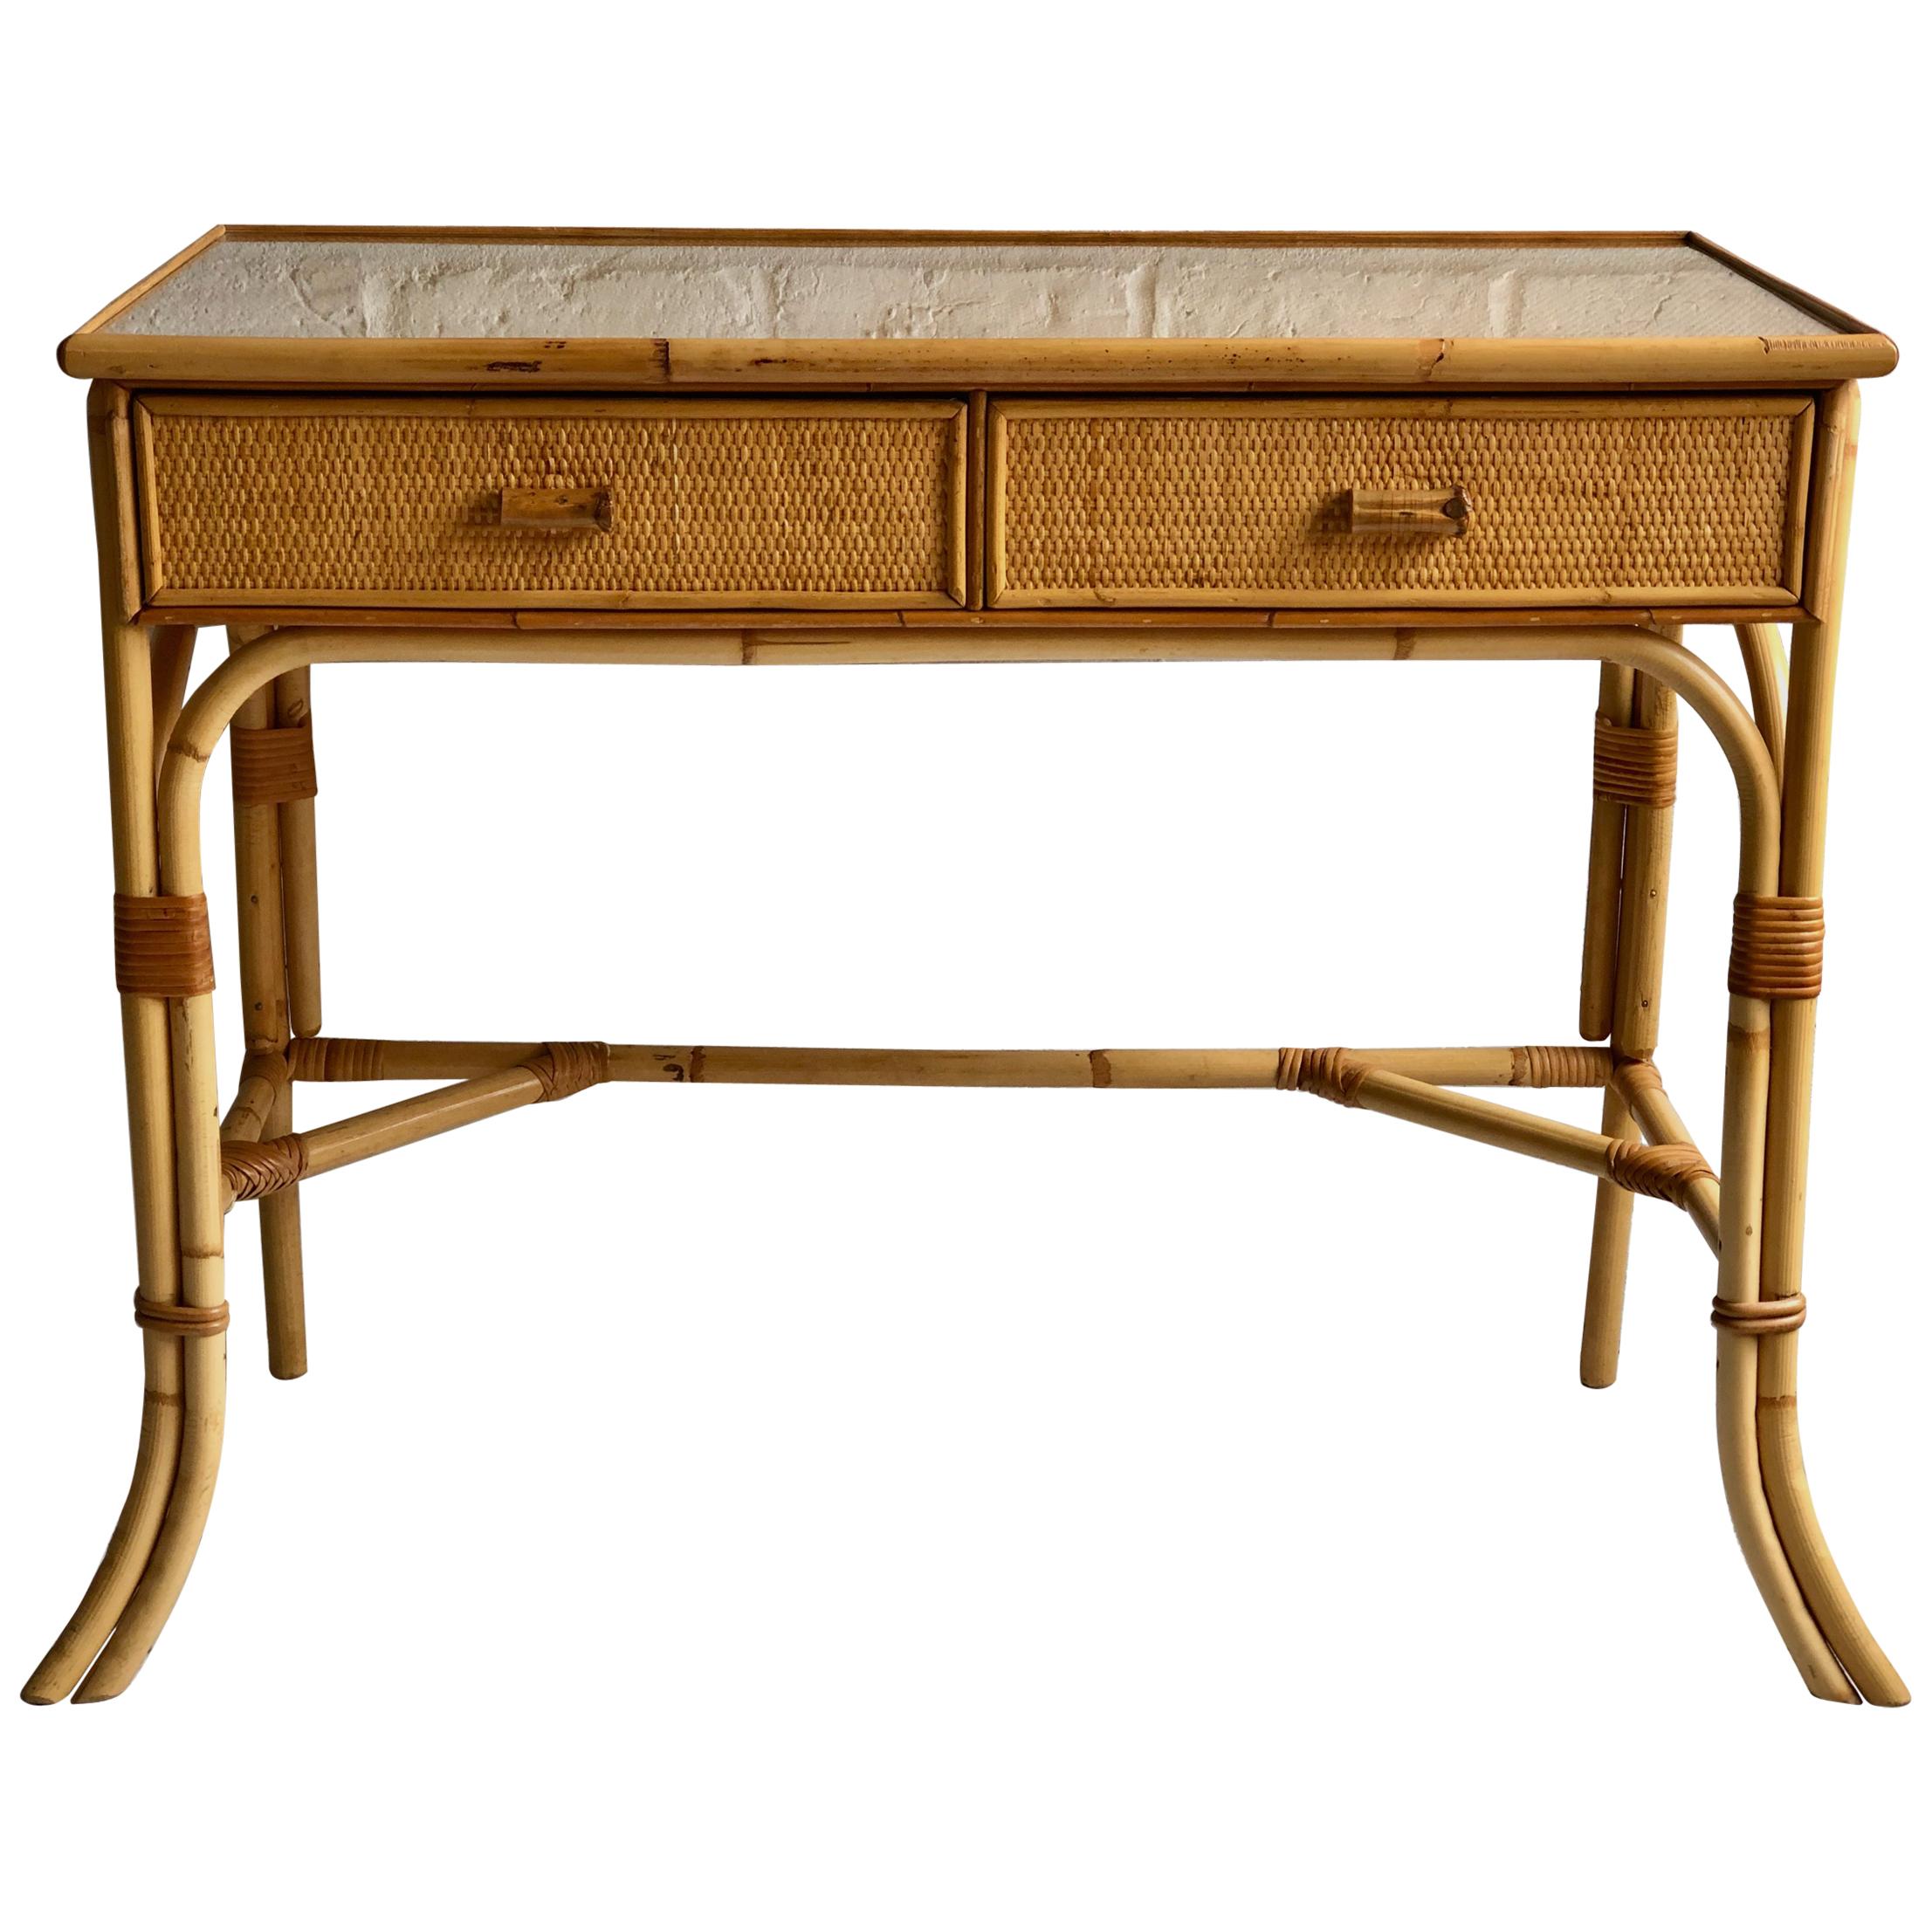 Midcentury Rattan Cane Dressing Table or Desk, Italy, Attrib. to Dal Vera 1970s